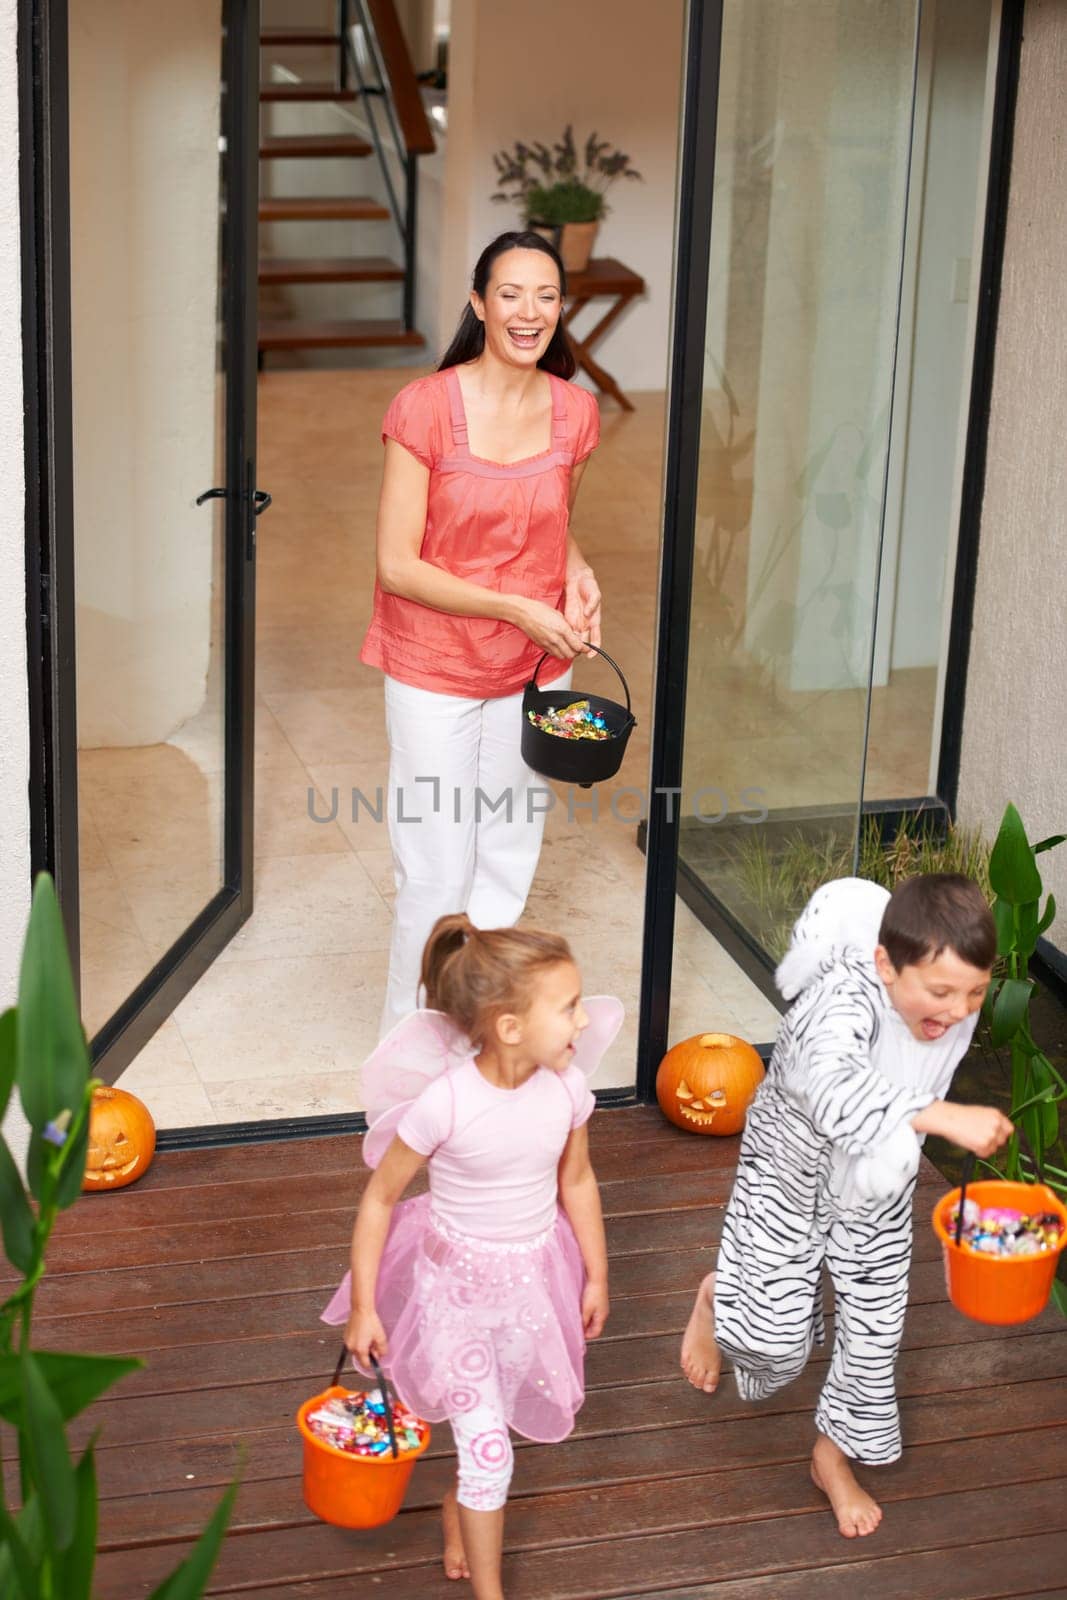 Family house, halloween and children running with candy for fun adventure or vacation tradition. Happy, love and mom watching kids in costume with candy, laugh and energy in costume for holiday prank by YuriArcurs